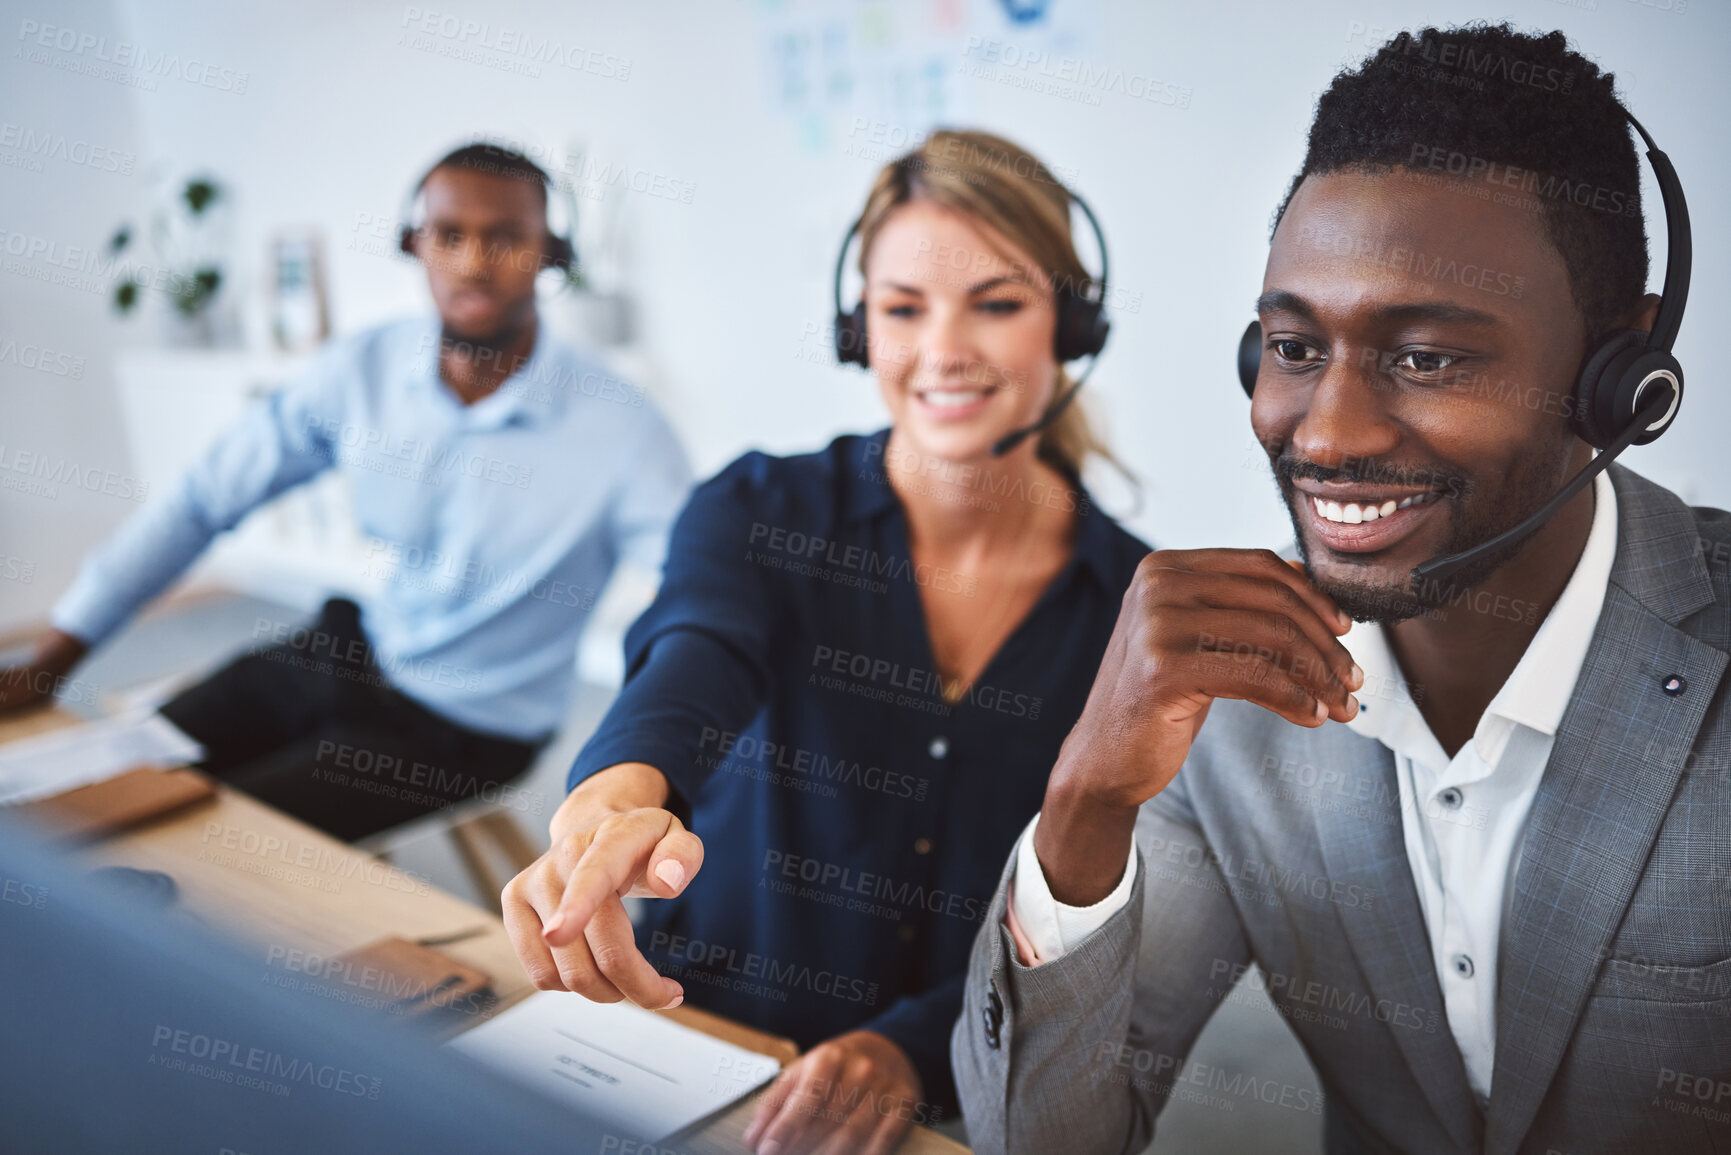 Buy stock photo Happy african american male call centre telemarketing agent discussing plans with diverse colleagues while working together on computer in an office. Consultants troubleshooting solution for customer service and sales support